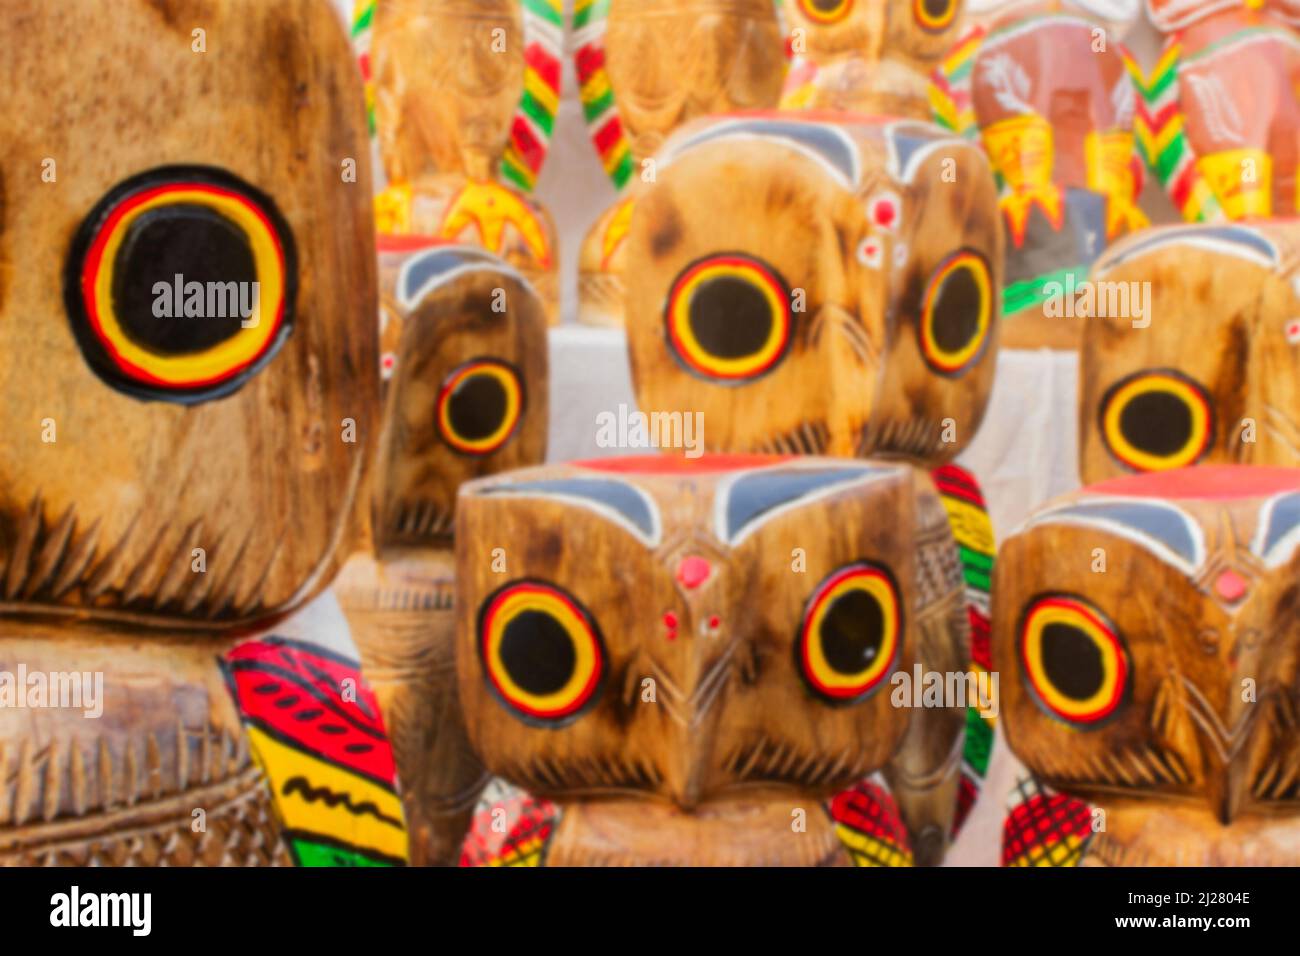 Blurred image of wooden owls, artworks of handicraft, on display during Handicraft Fair in Kolkata - the biggest handicrafts fair in Asia. Stock Photo